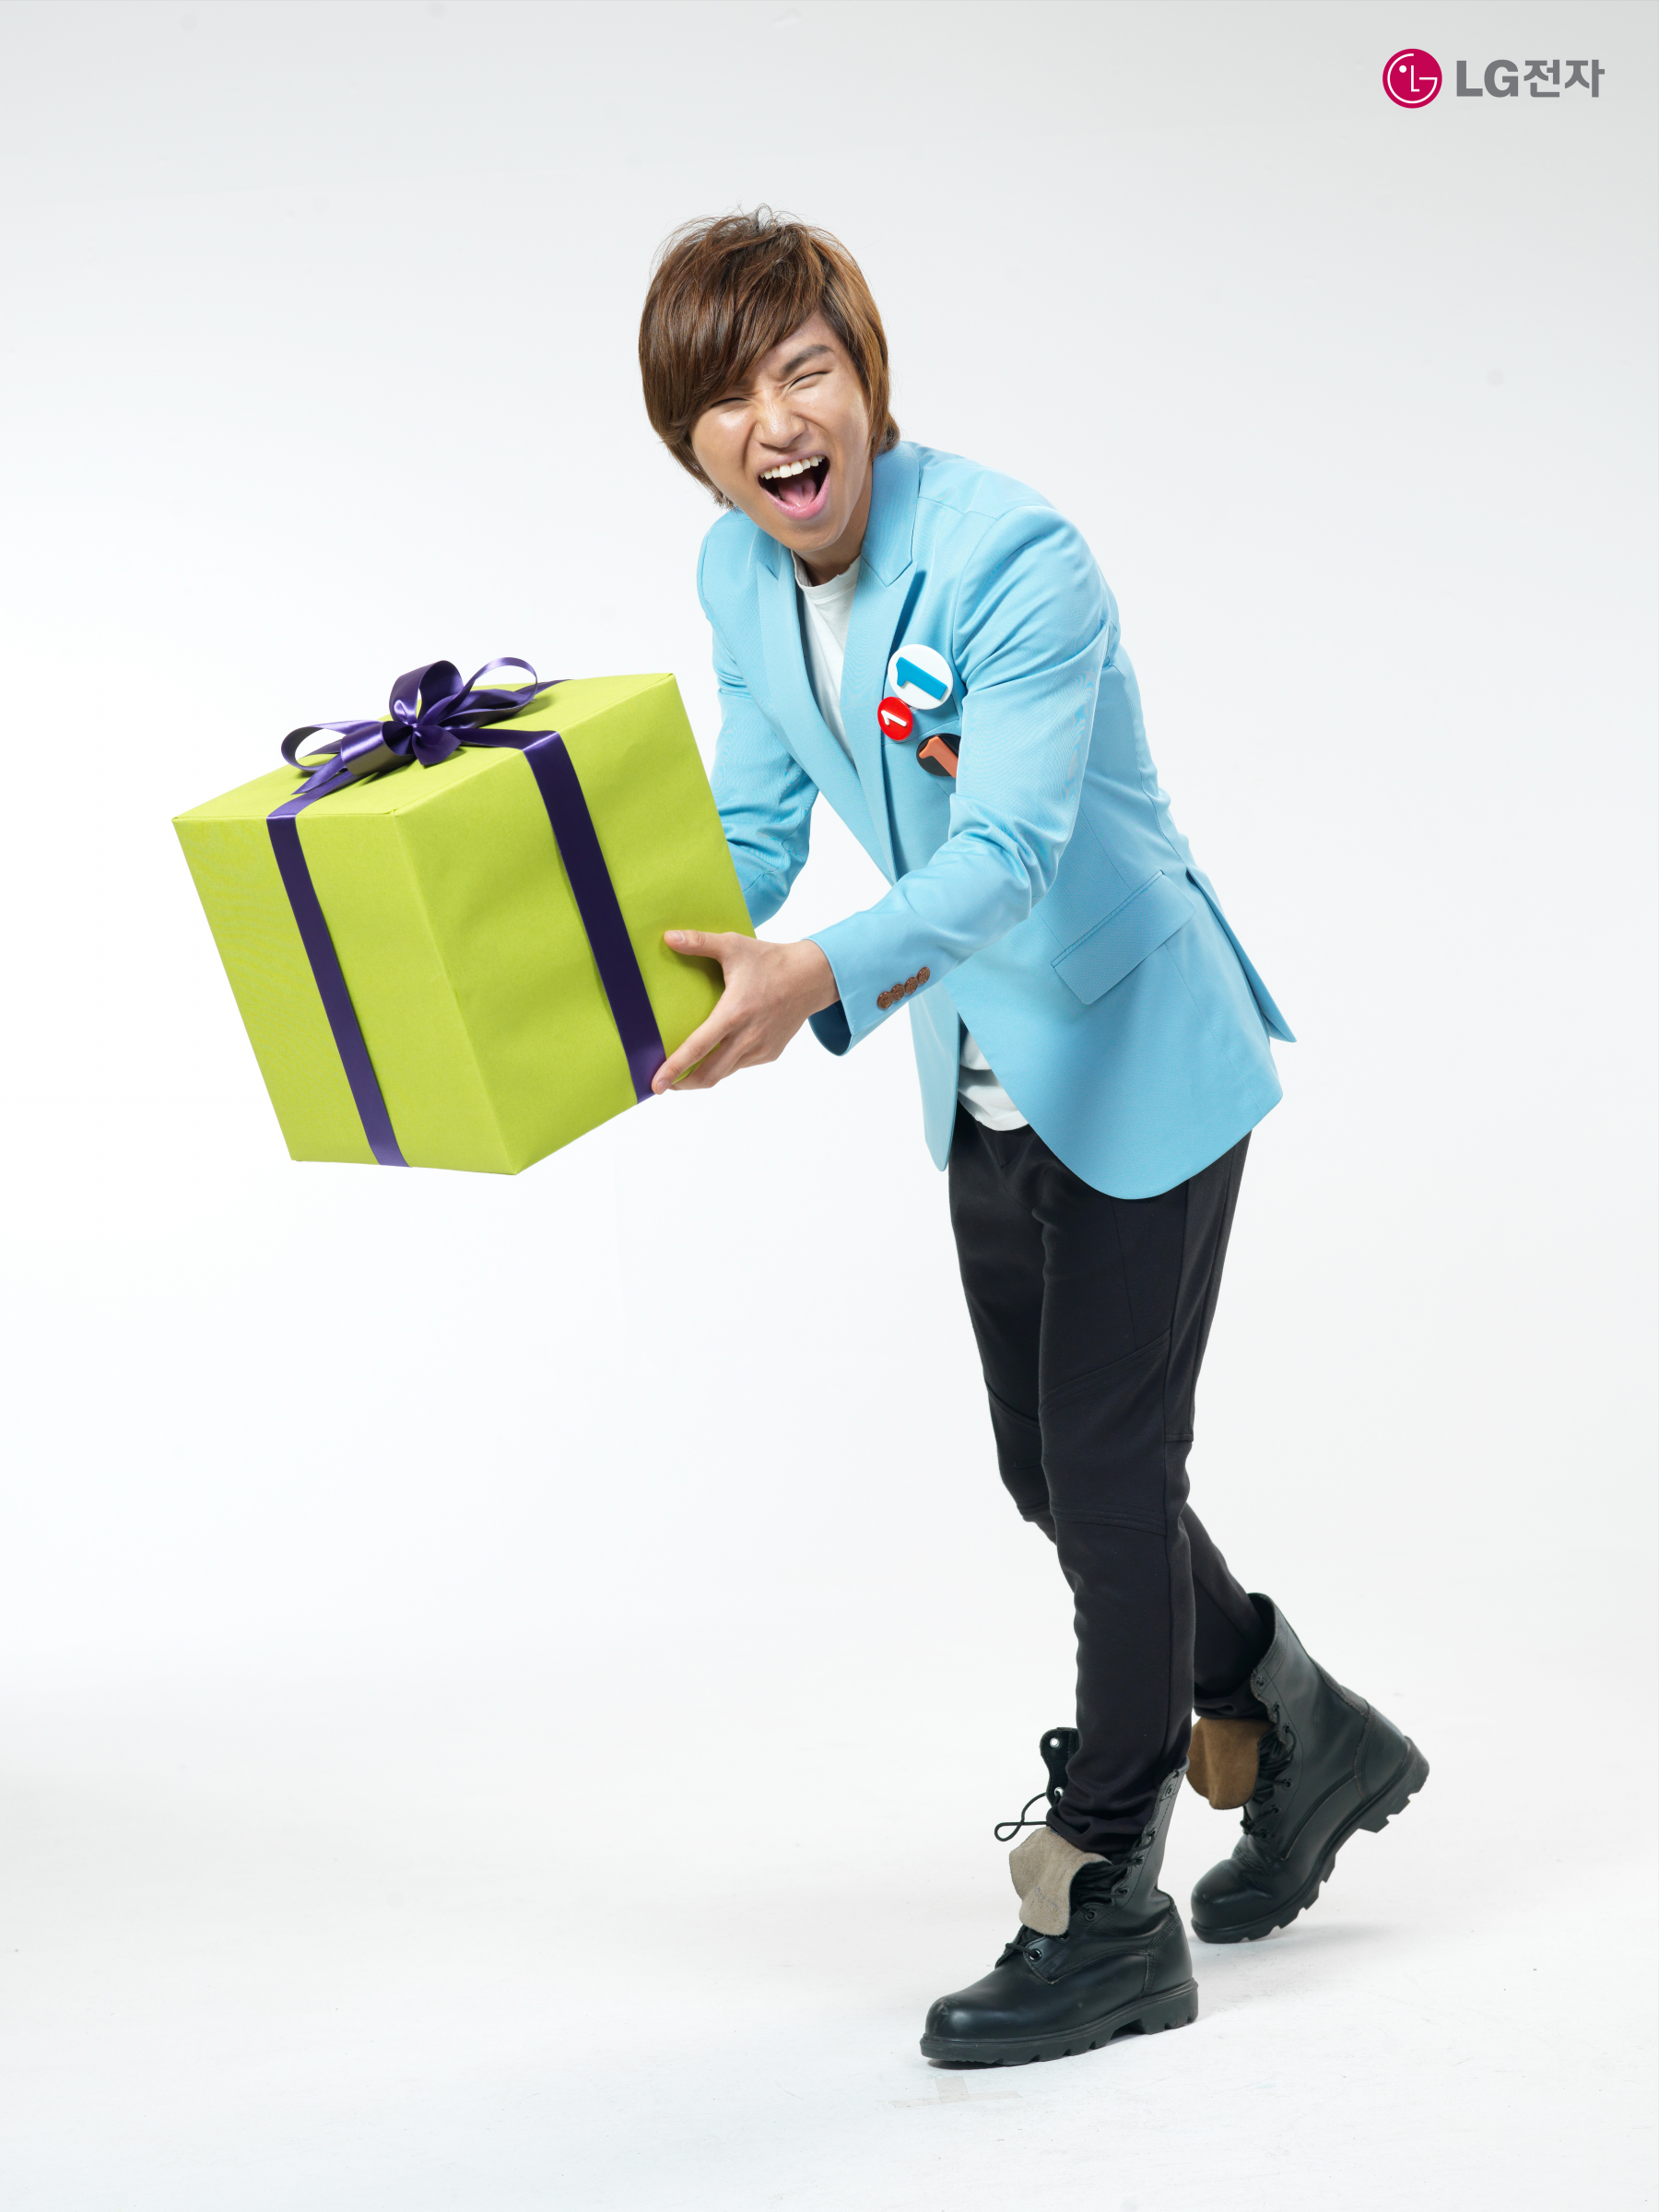 Daesung Image HD Wallpaper And Background